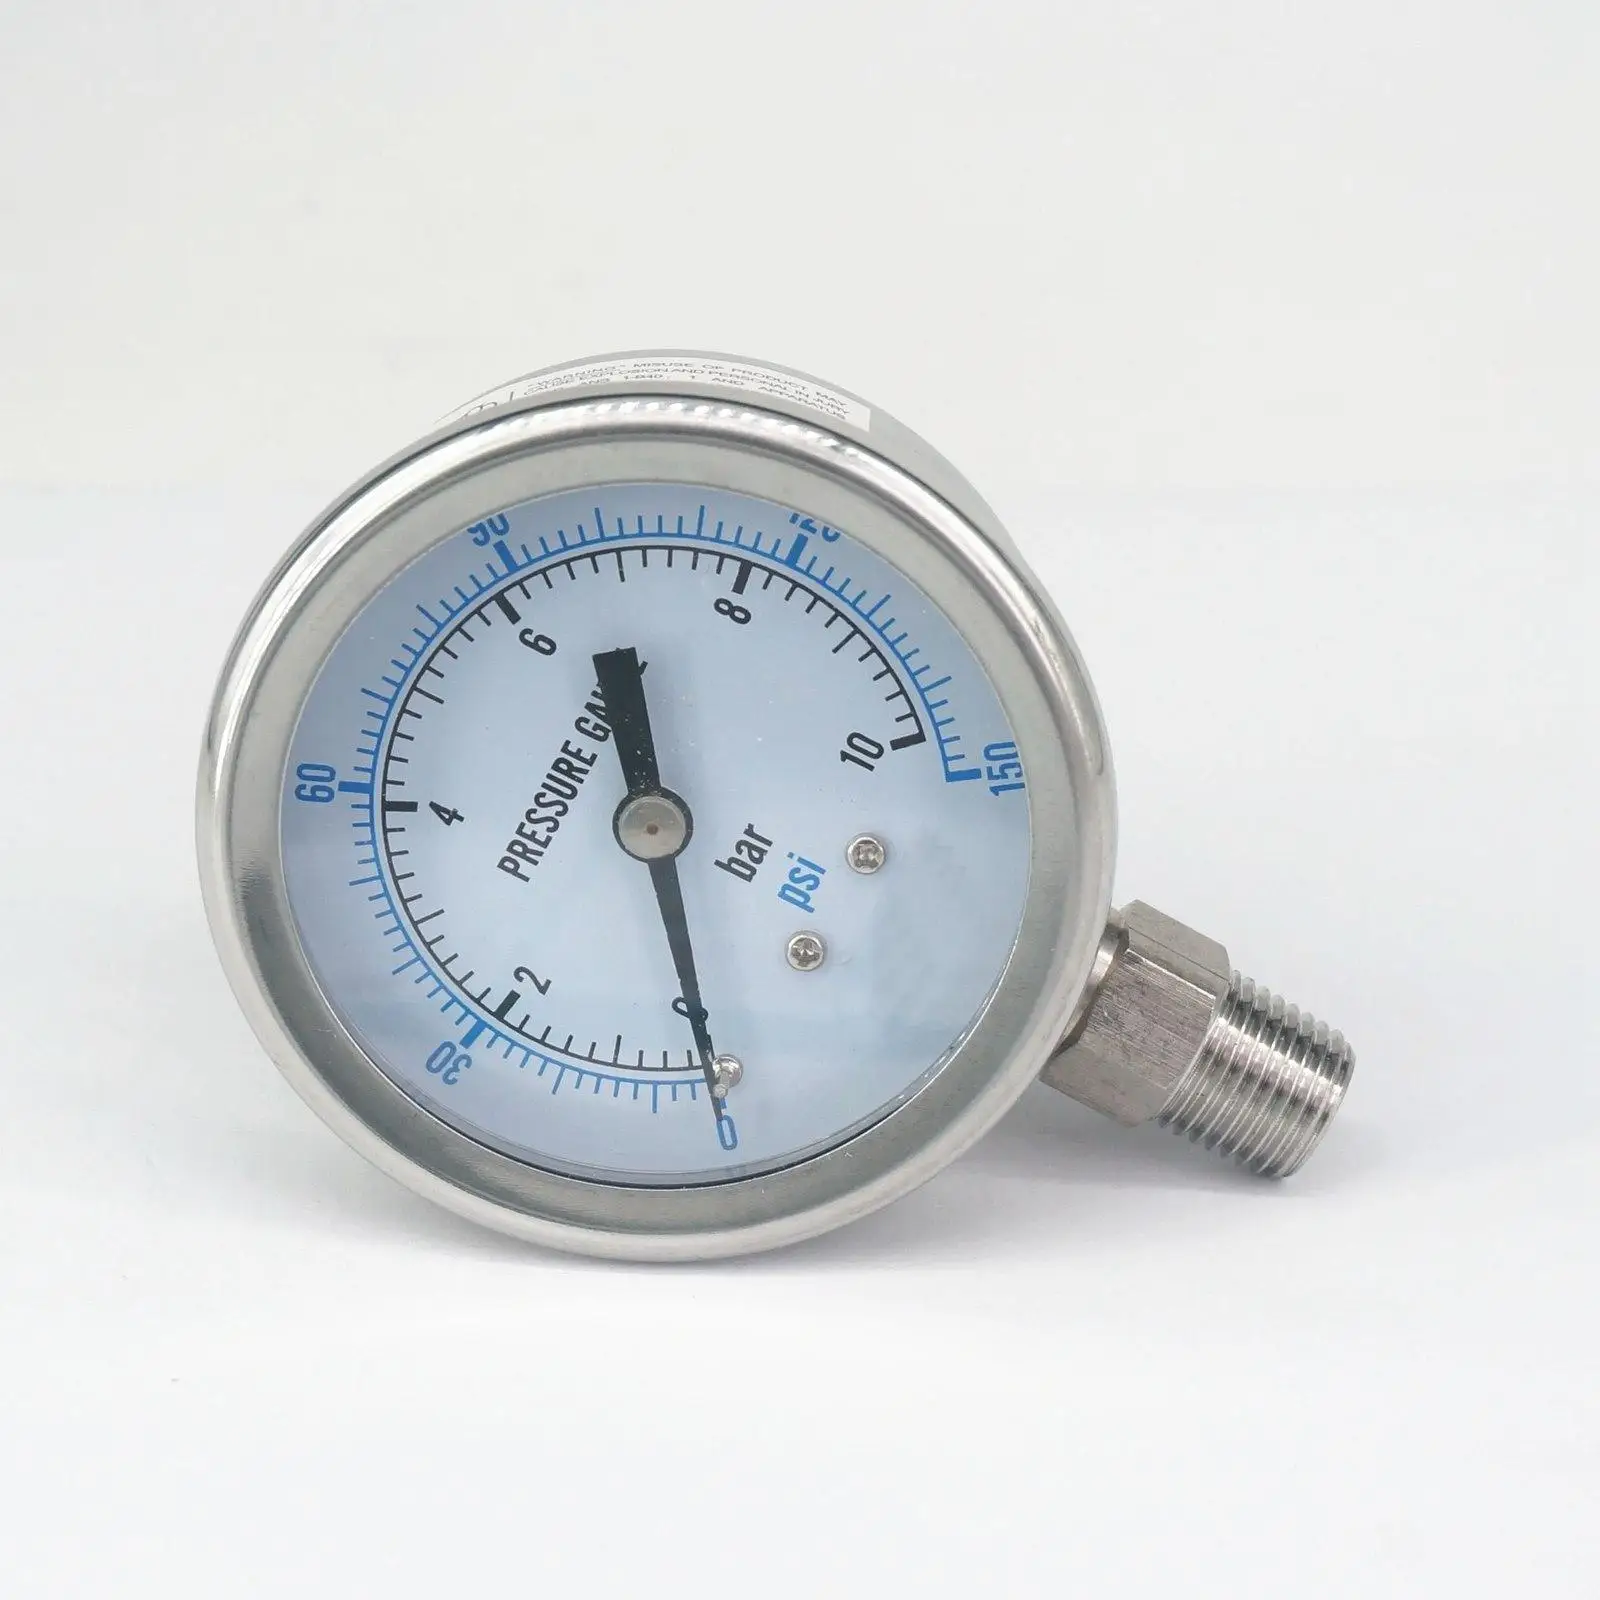 

0-10bar 1/8" NPT Male 60mm Dial High Quality Pressure Gauge 304 Stainless Bar PSI N2 Steam Brewing Pneumatic Accuracy Class 2.5%